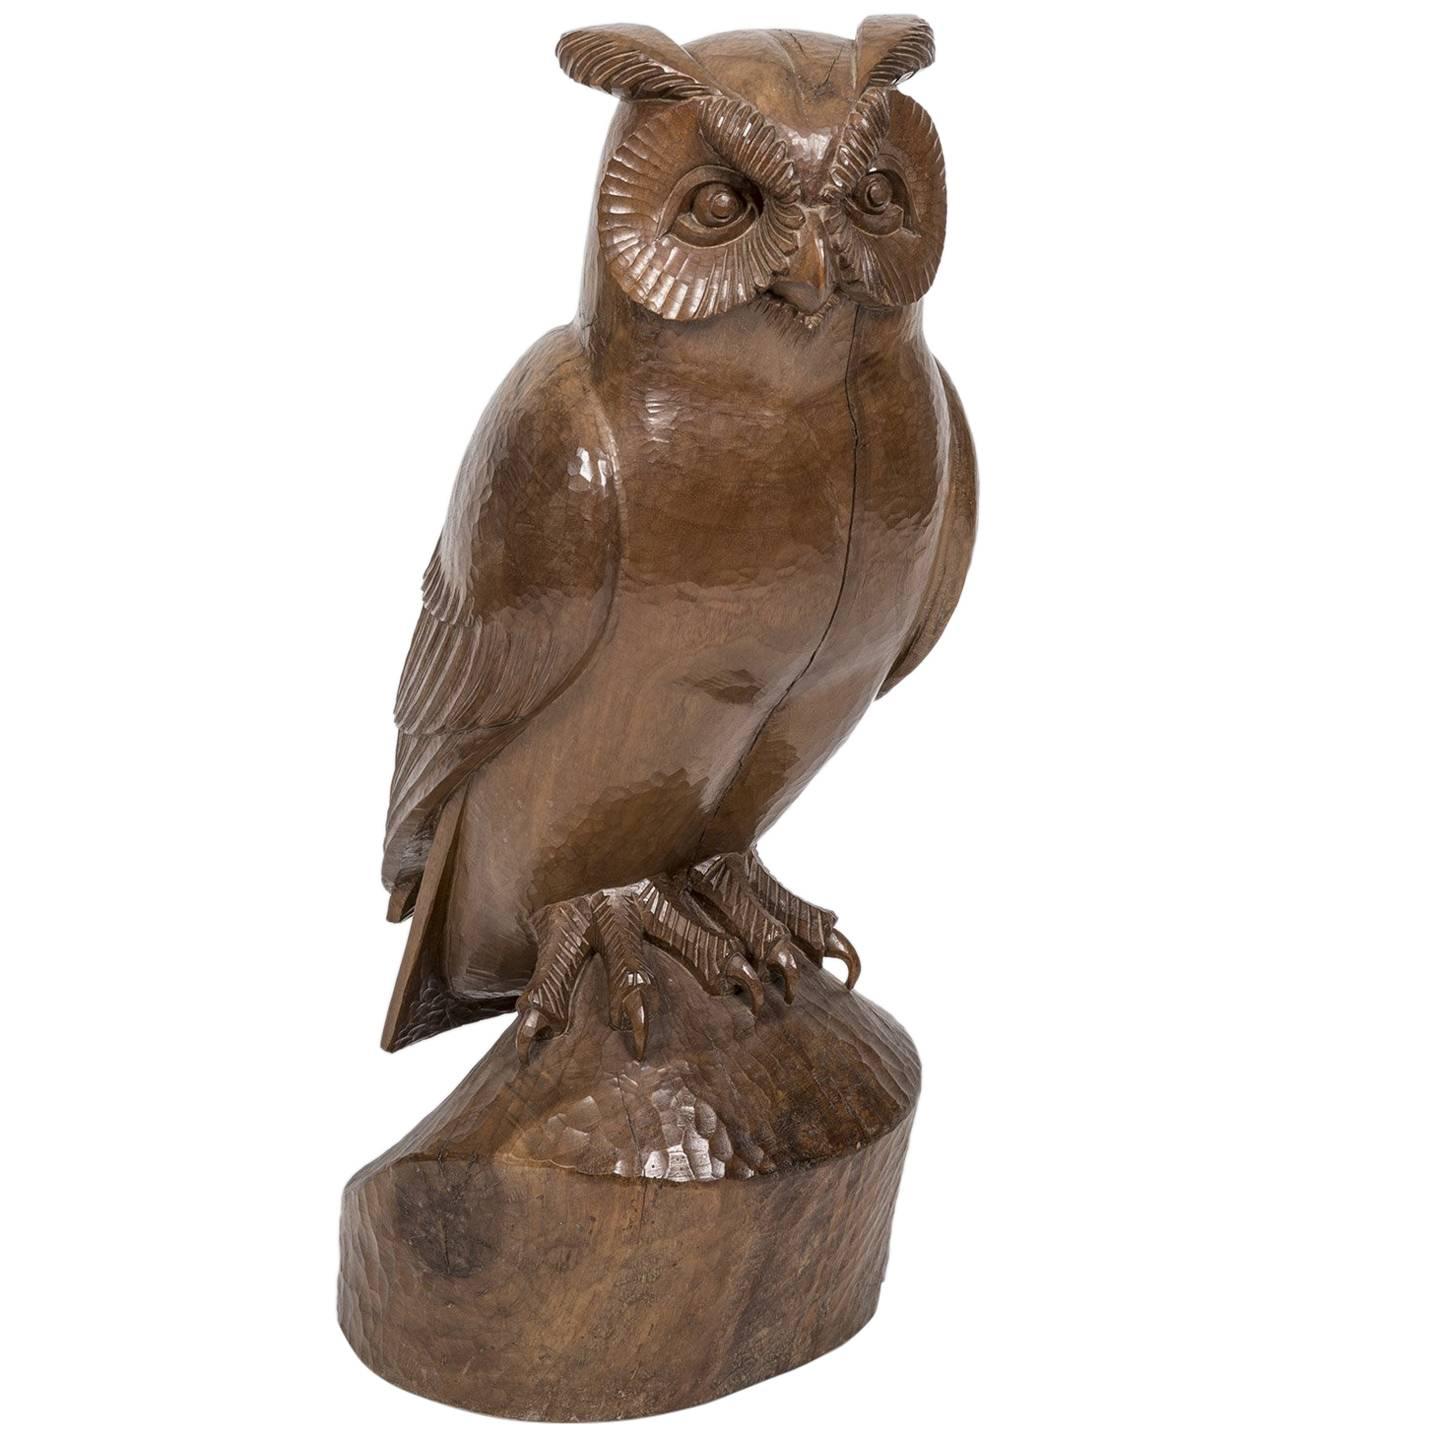 Owl "Hibou" Carved Rosewood Bird Sculpture by French Artist François Galoyer